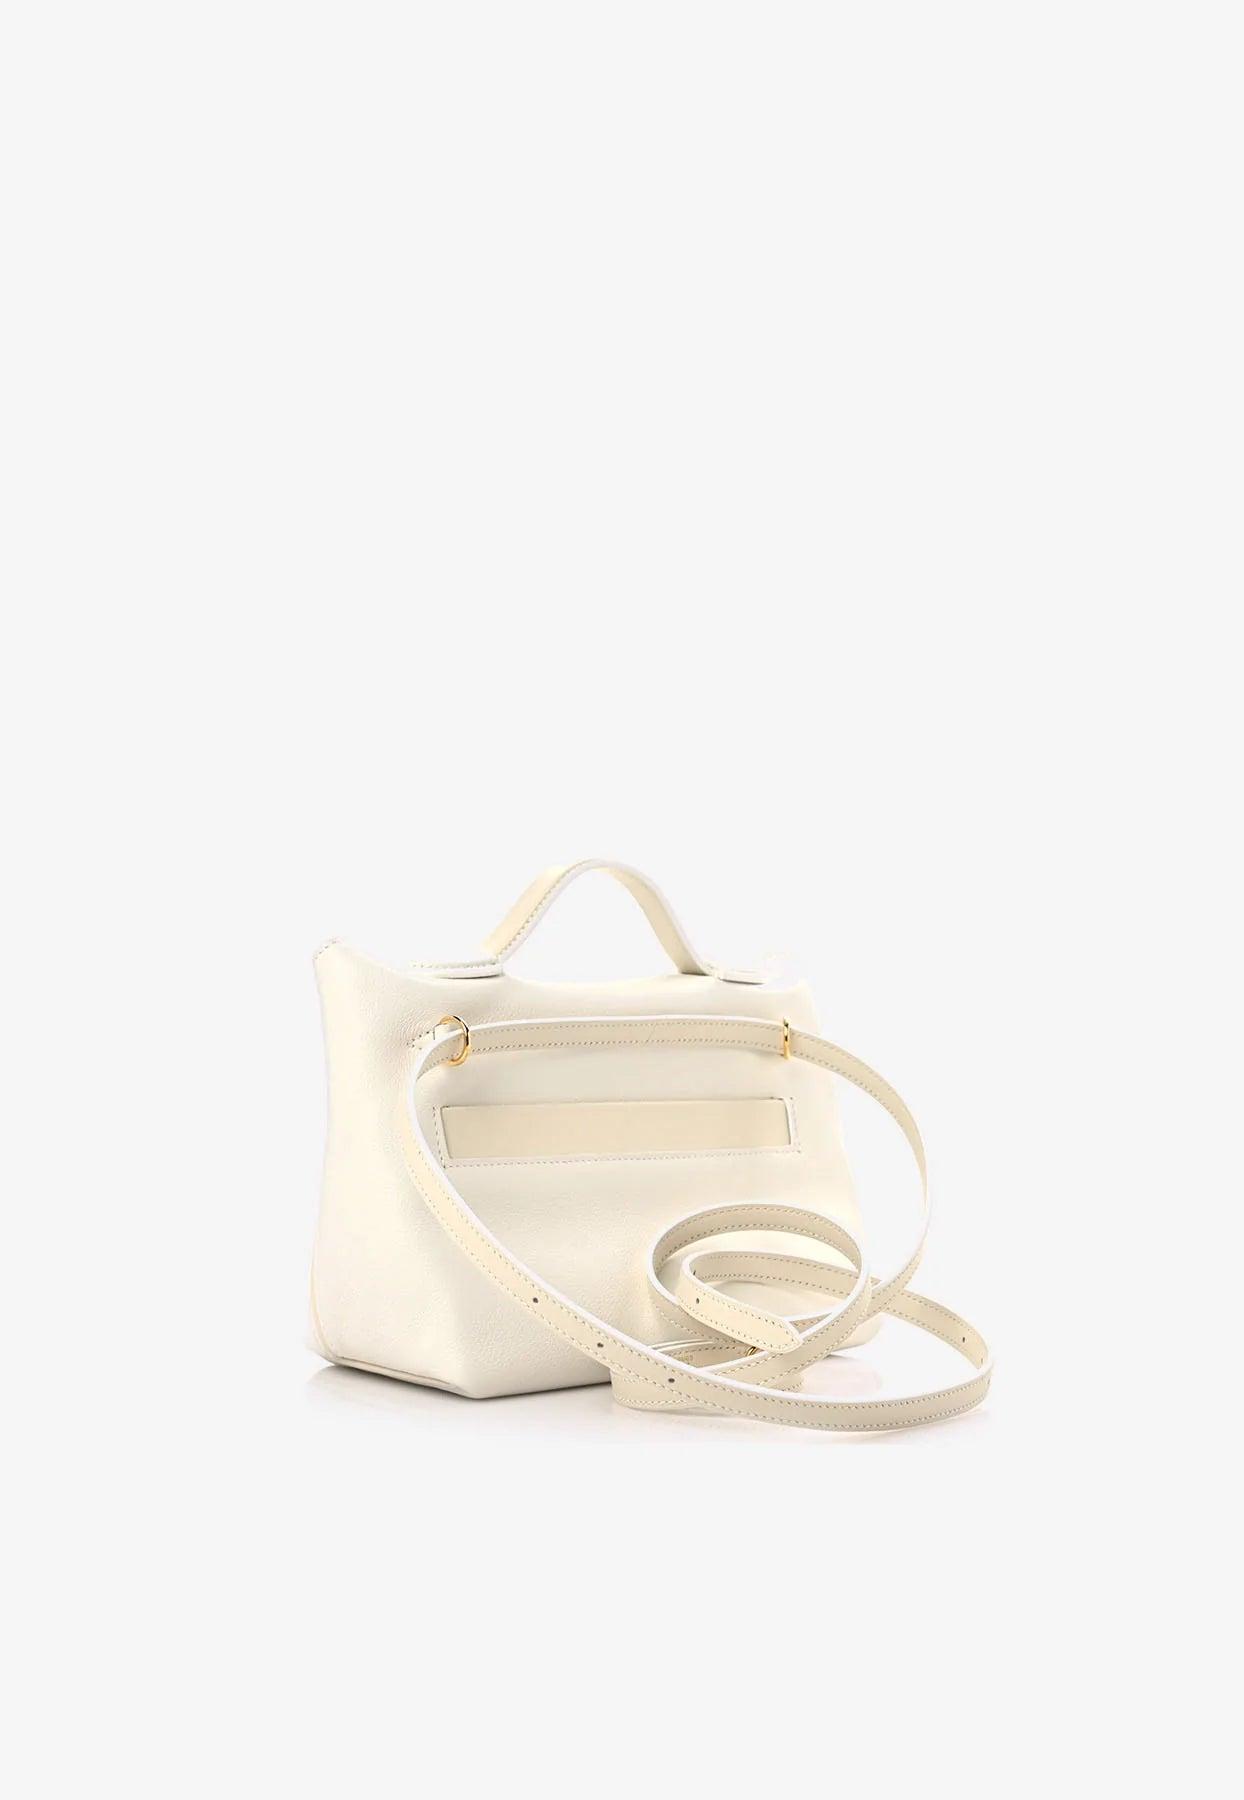 Hermès 24/24 21 In White Evercolor And Swift With Gold Hardware